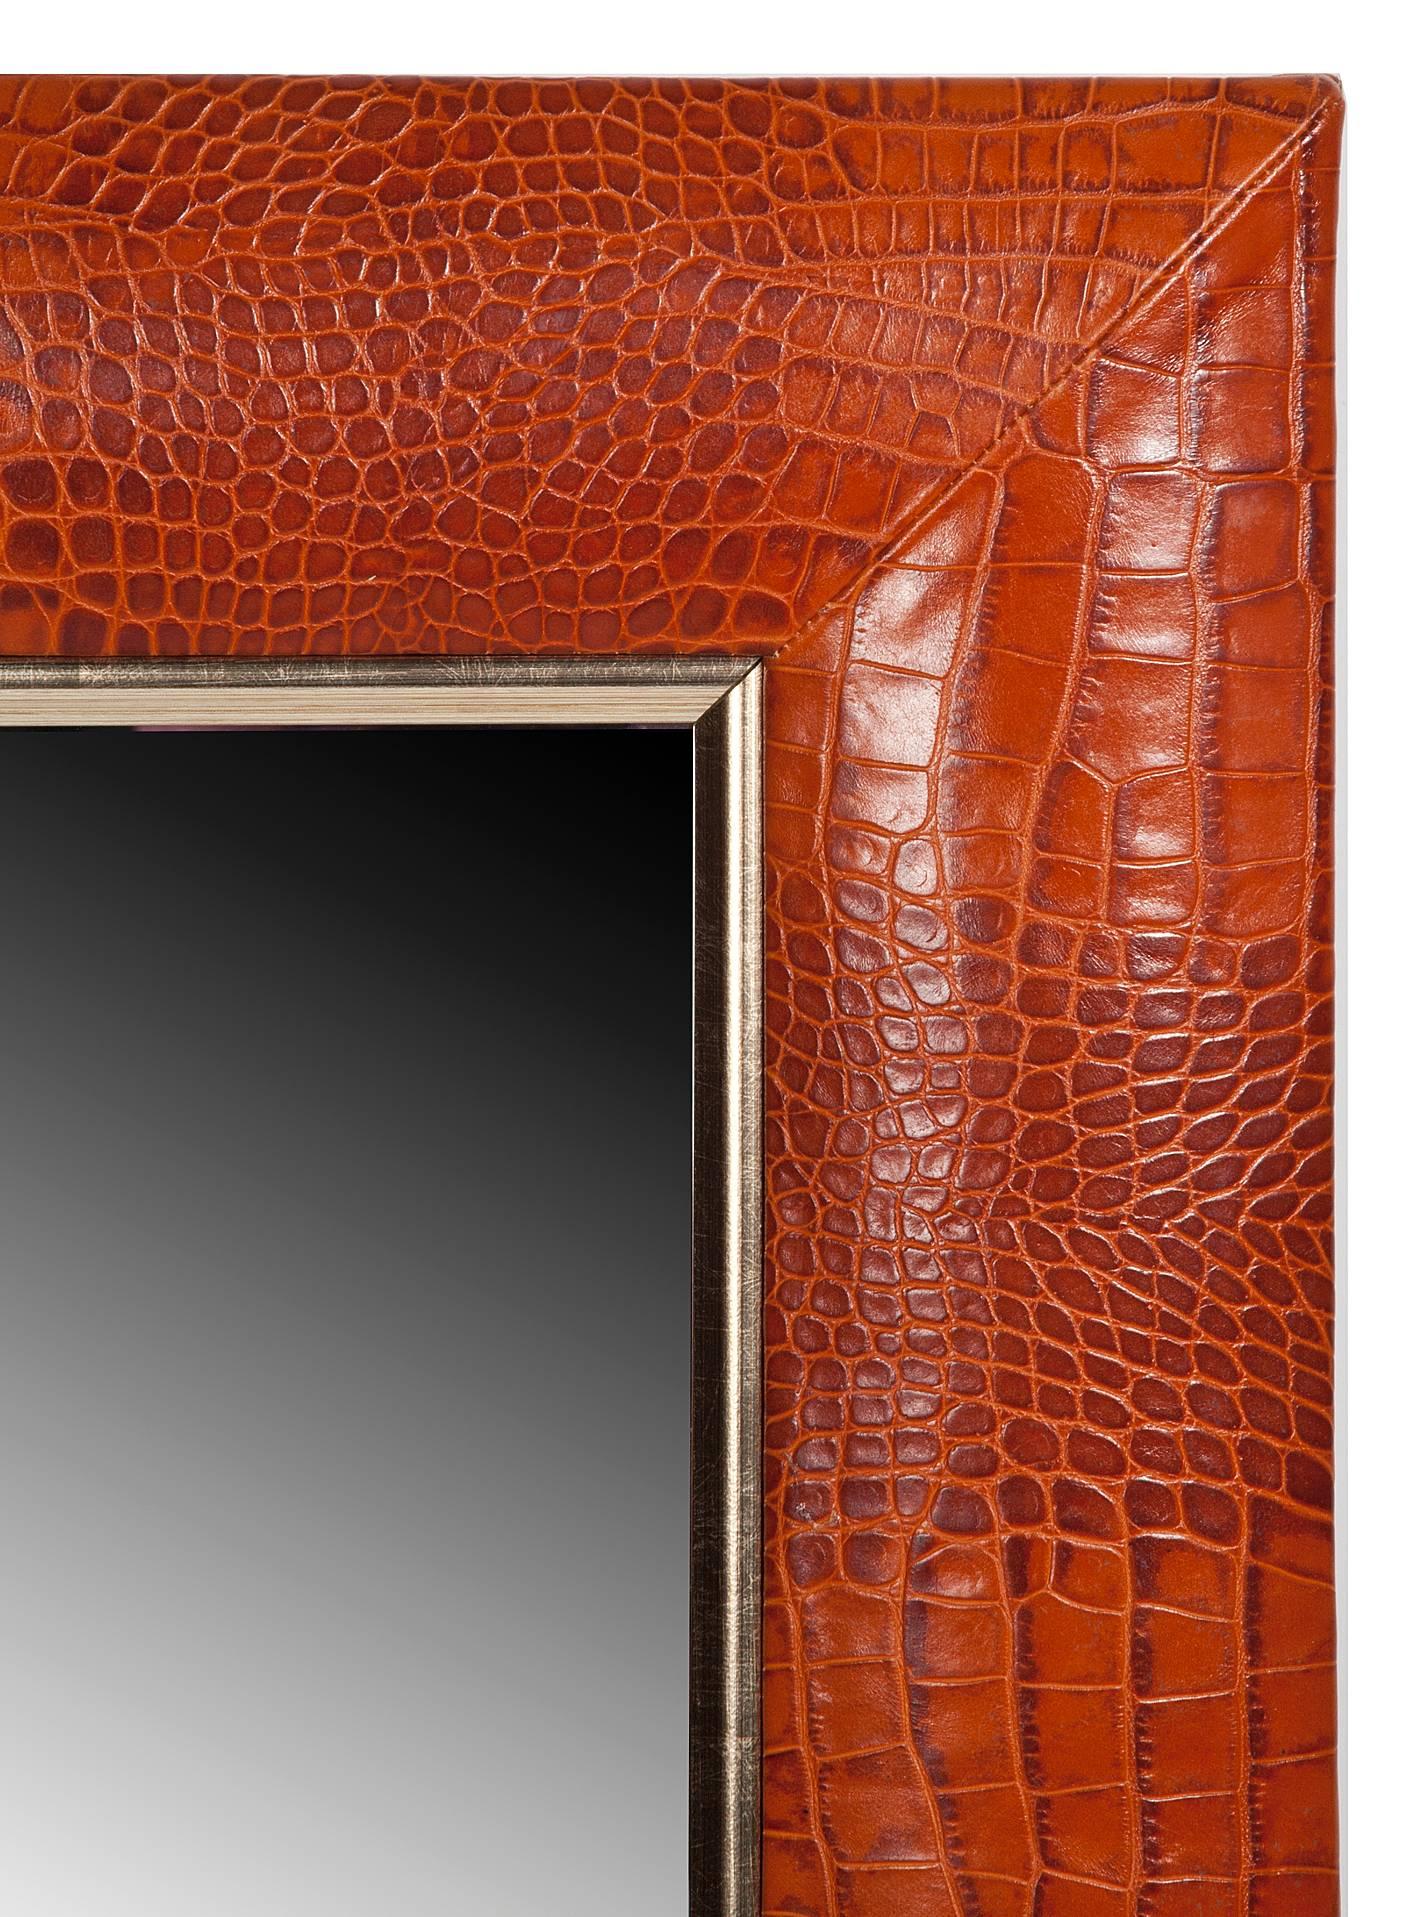 Cognac embossed crocodile Italian leather with champagne gold detailing.
1 ¼” beveled mirror.
4” wide leather frame.
Hand-stitched corners.
Measurements including frame: 24” W x 28” H x 1” D.

Made in the USA.
Custom and made to